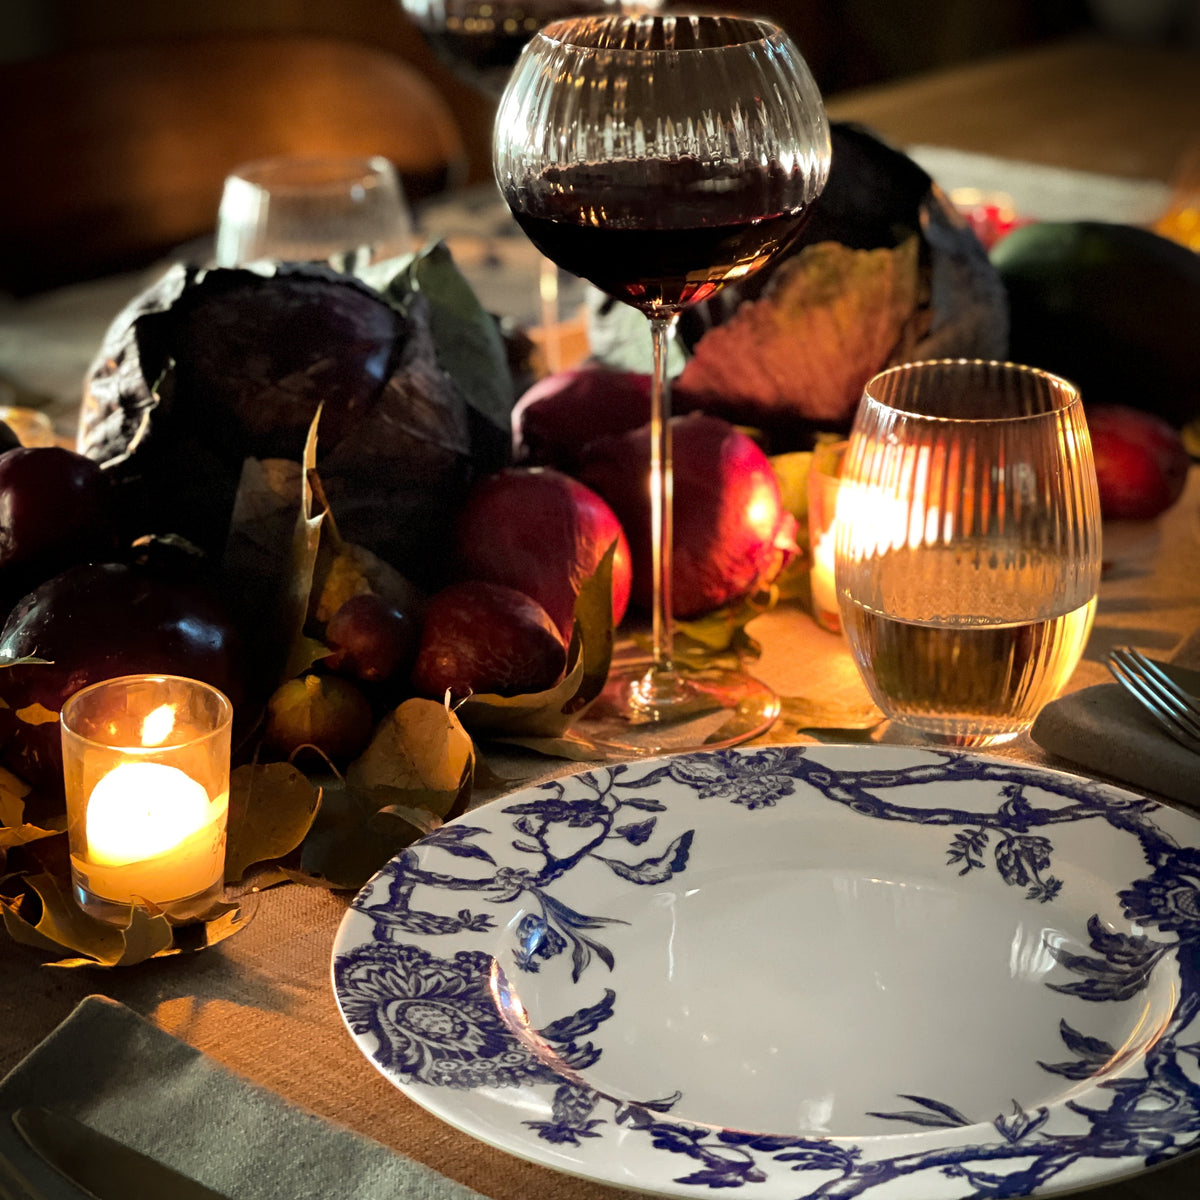 A set dining table features a blue and white Caskata Artisanal Home Arcadia Rimmed Dinner Plate, a glass of red wine, a glass of water, assorted vegetables, and a lit candle.